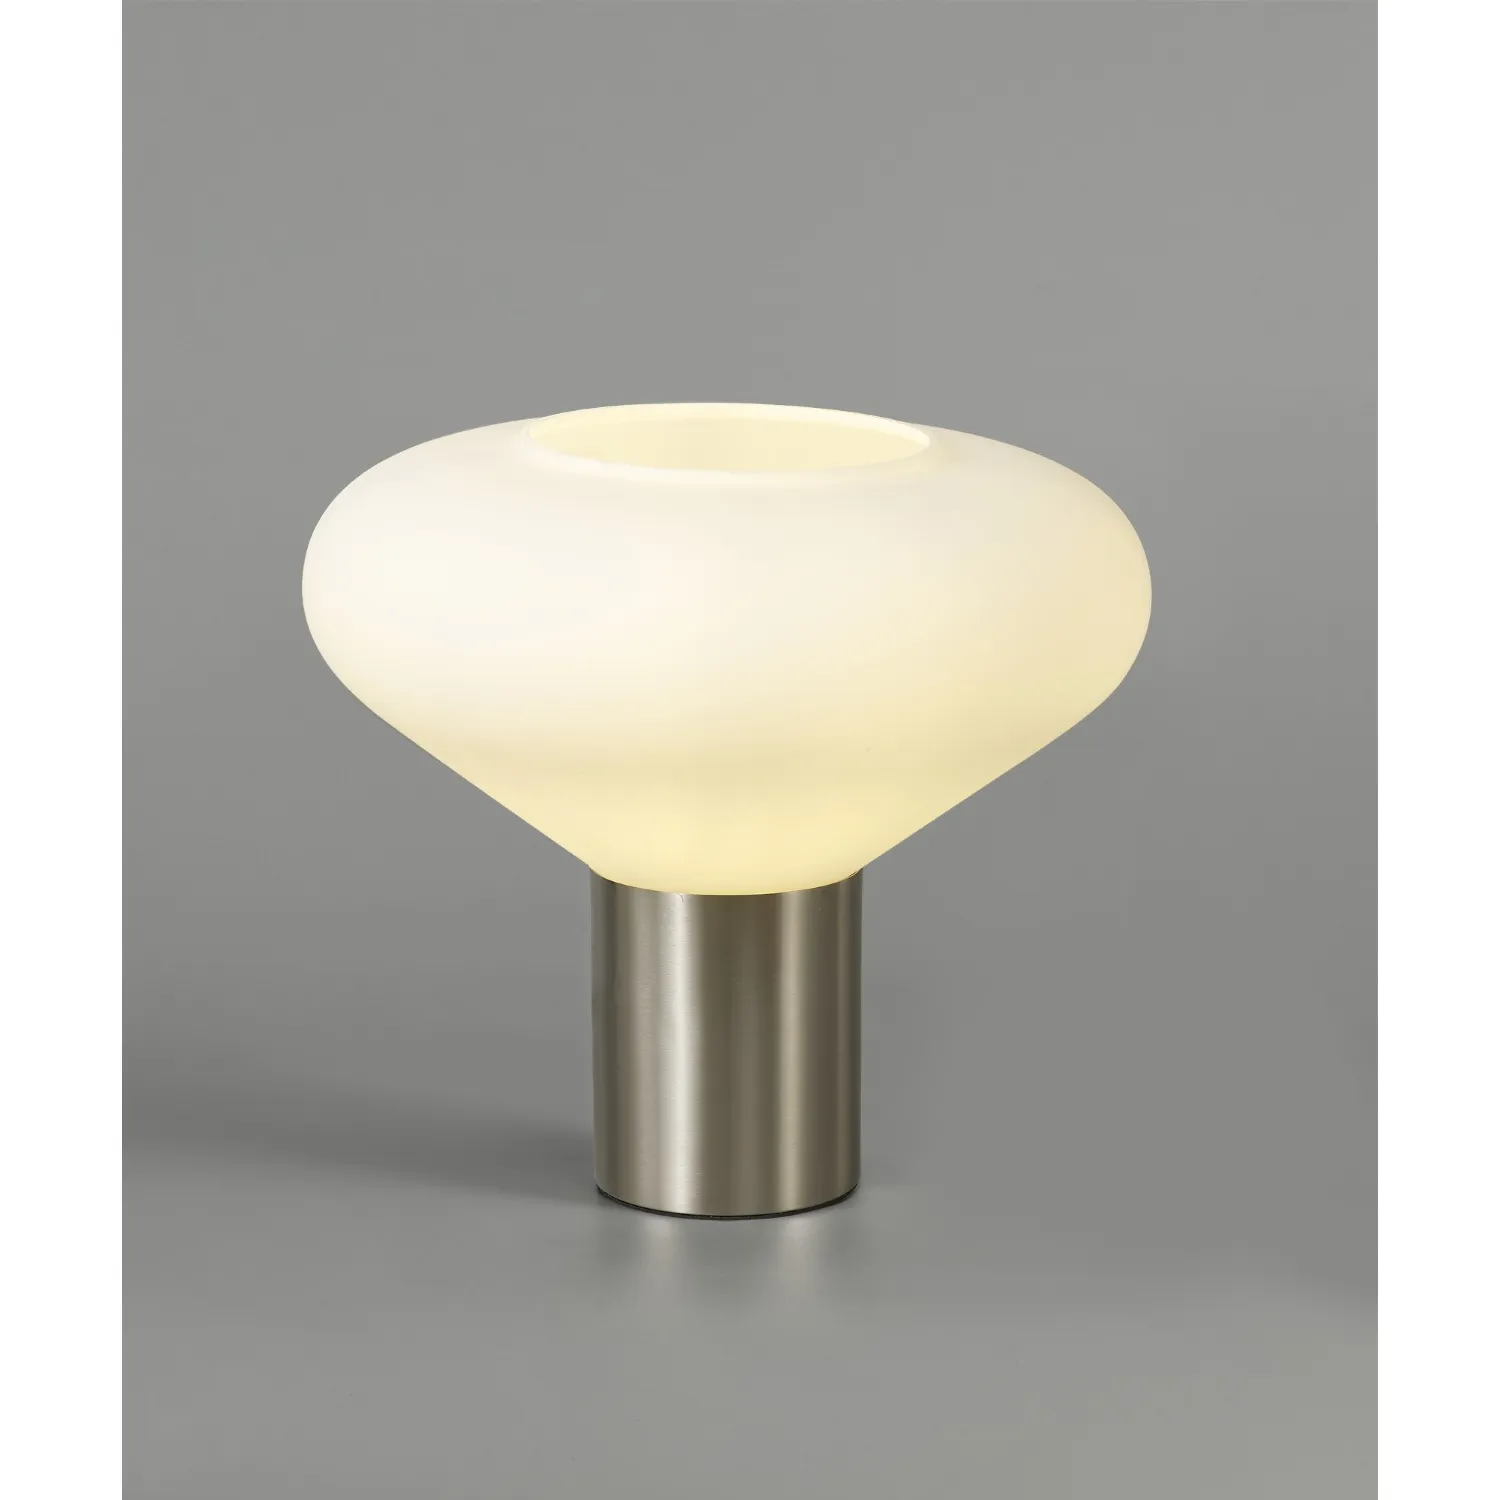 Copthorne Wide Table Lamp, 1 x E27, Satin Nickel Opal Glass